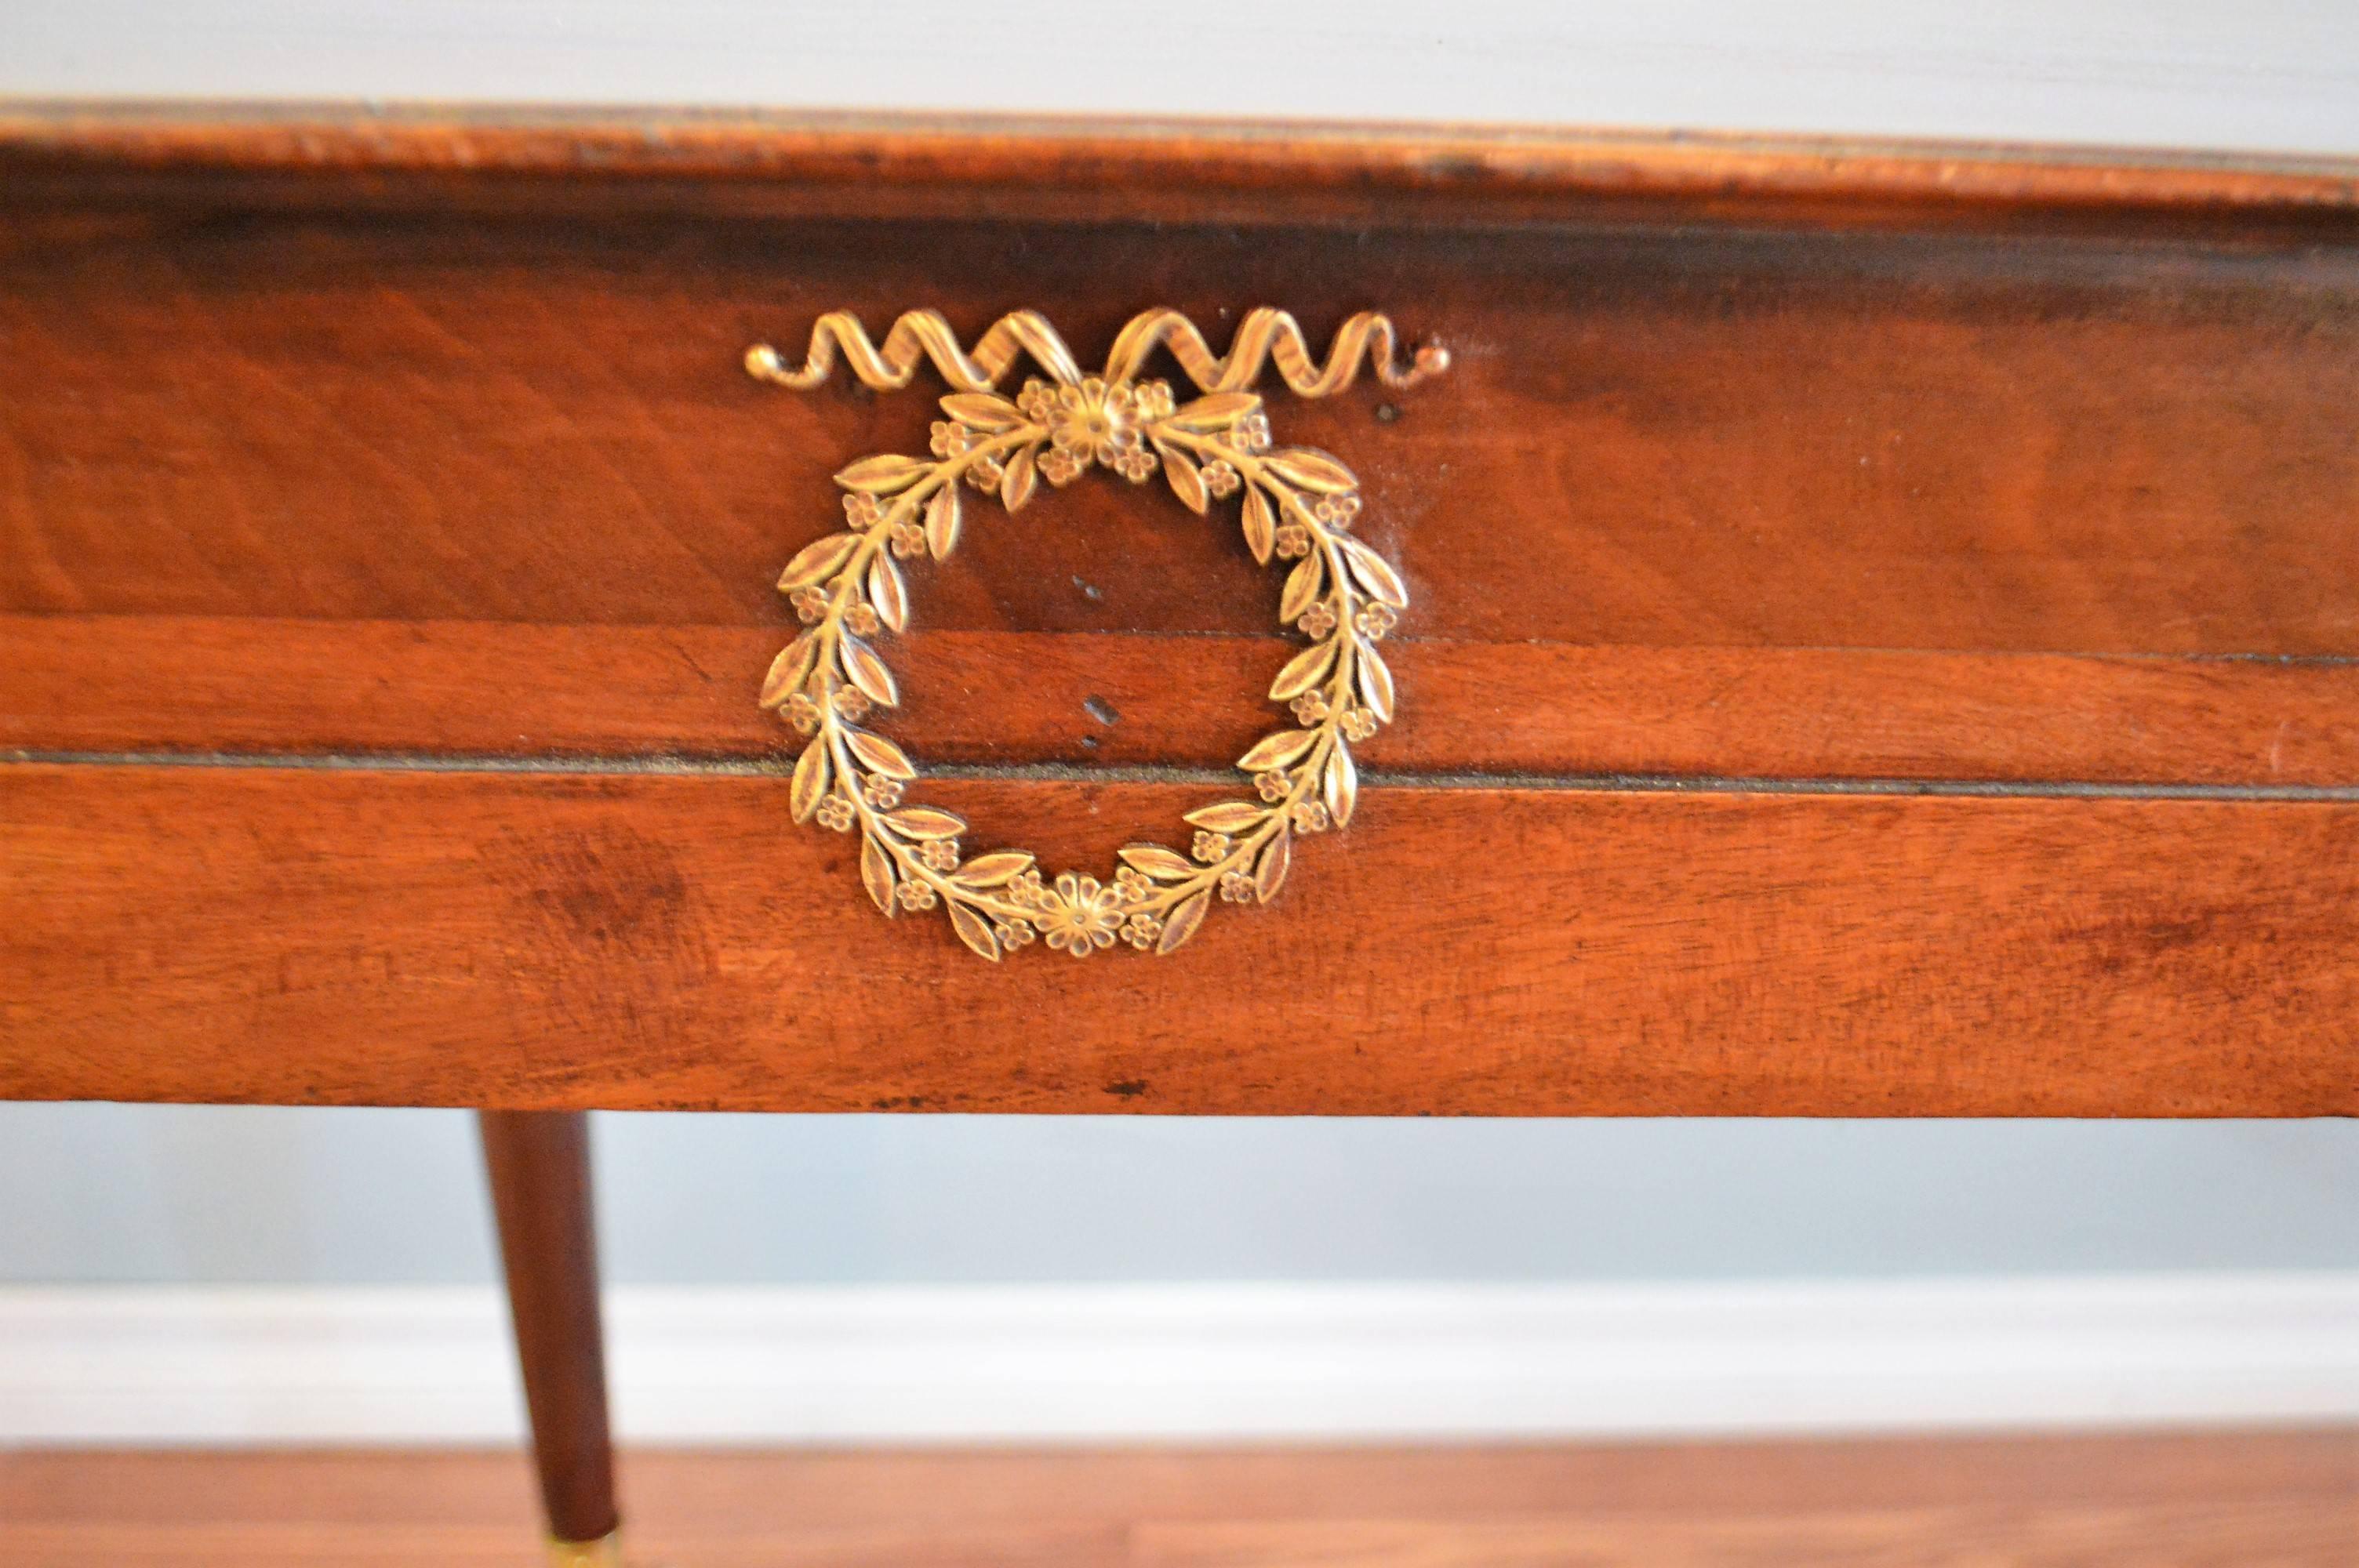 Handcrafted elements to this unique mahogany console that could also work beautifully for a sofa table. The front of the console has one drawer.
Lovely and fine bronze wreath decorative hardware at the front of the table.